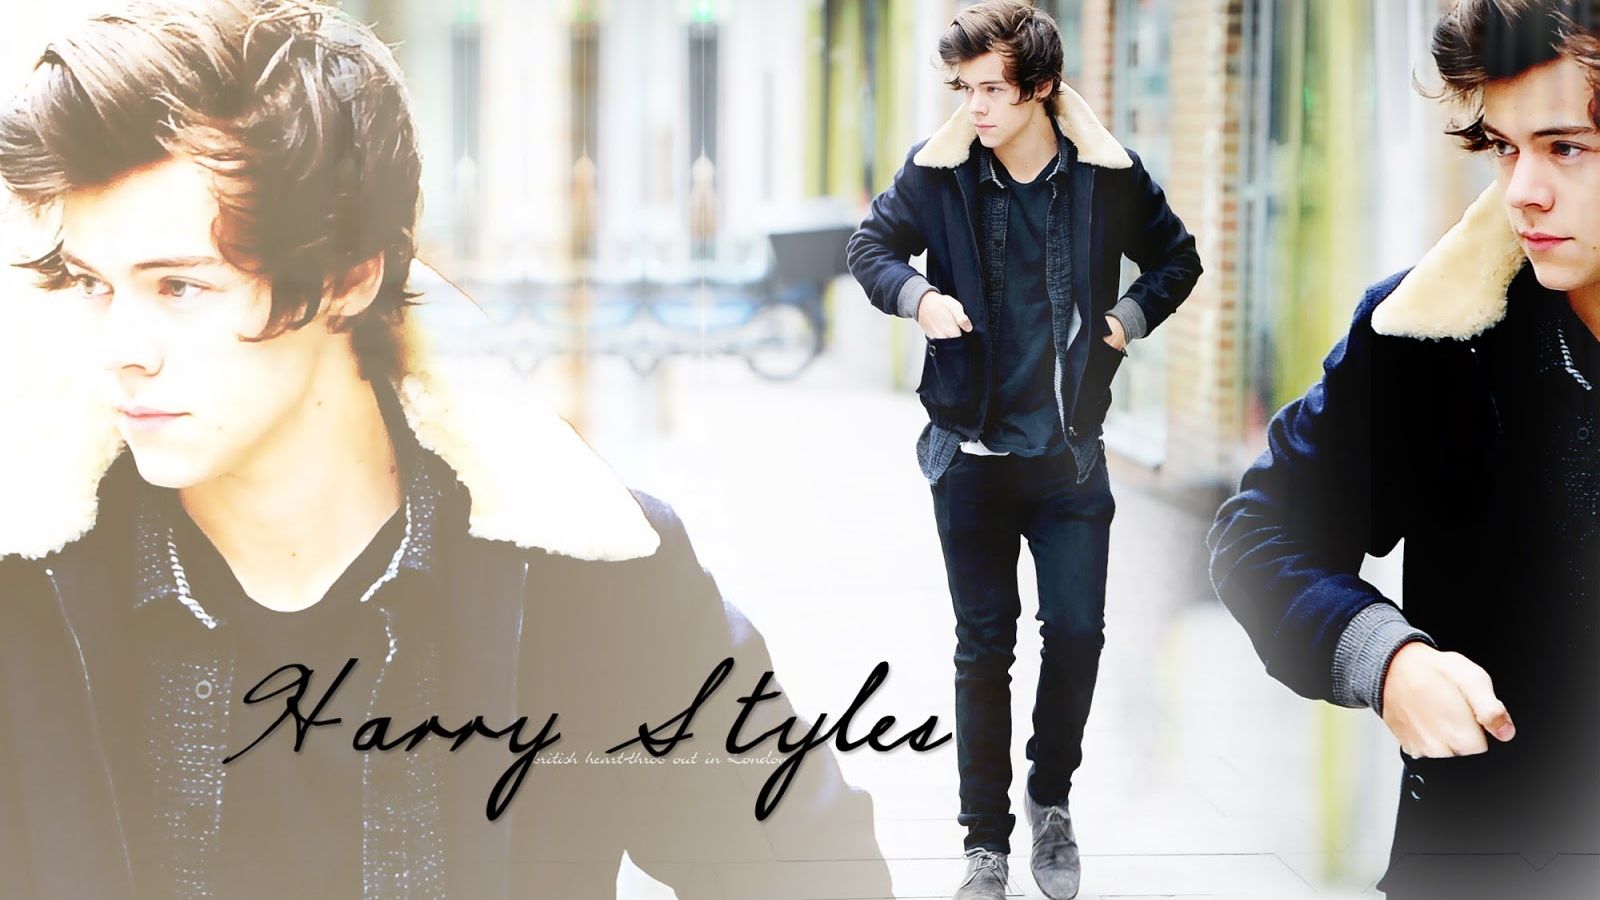 Free download harry styles wallpaper for mac pc android iphone